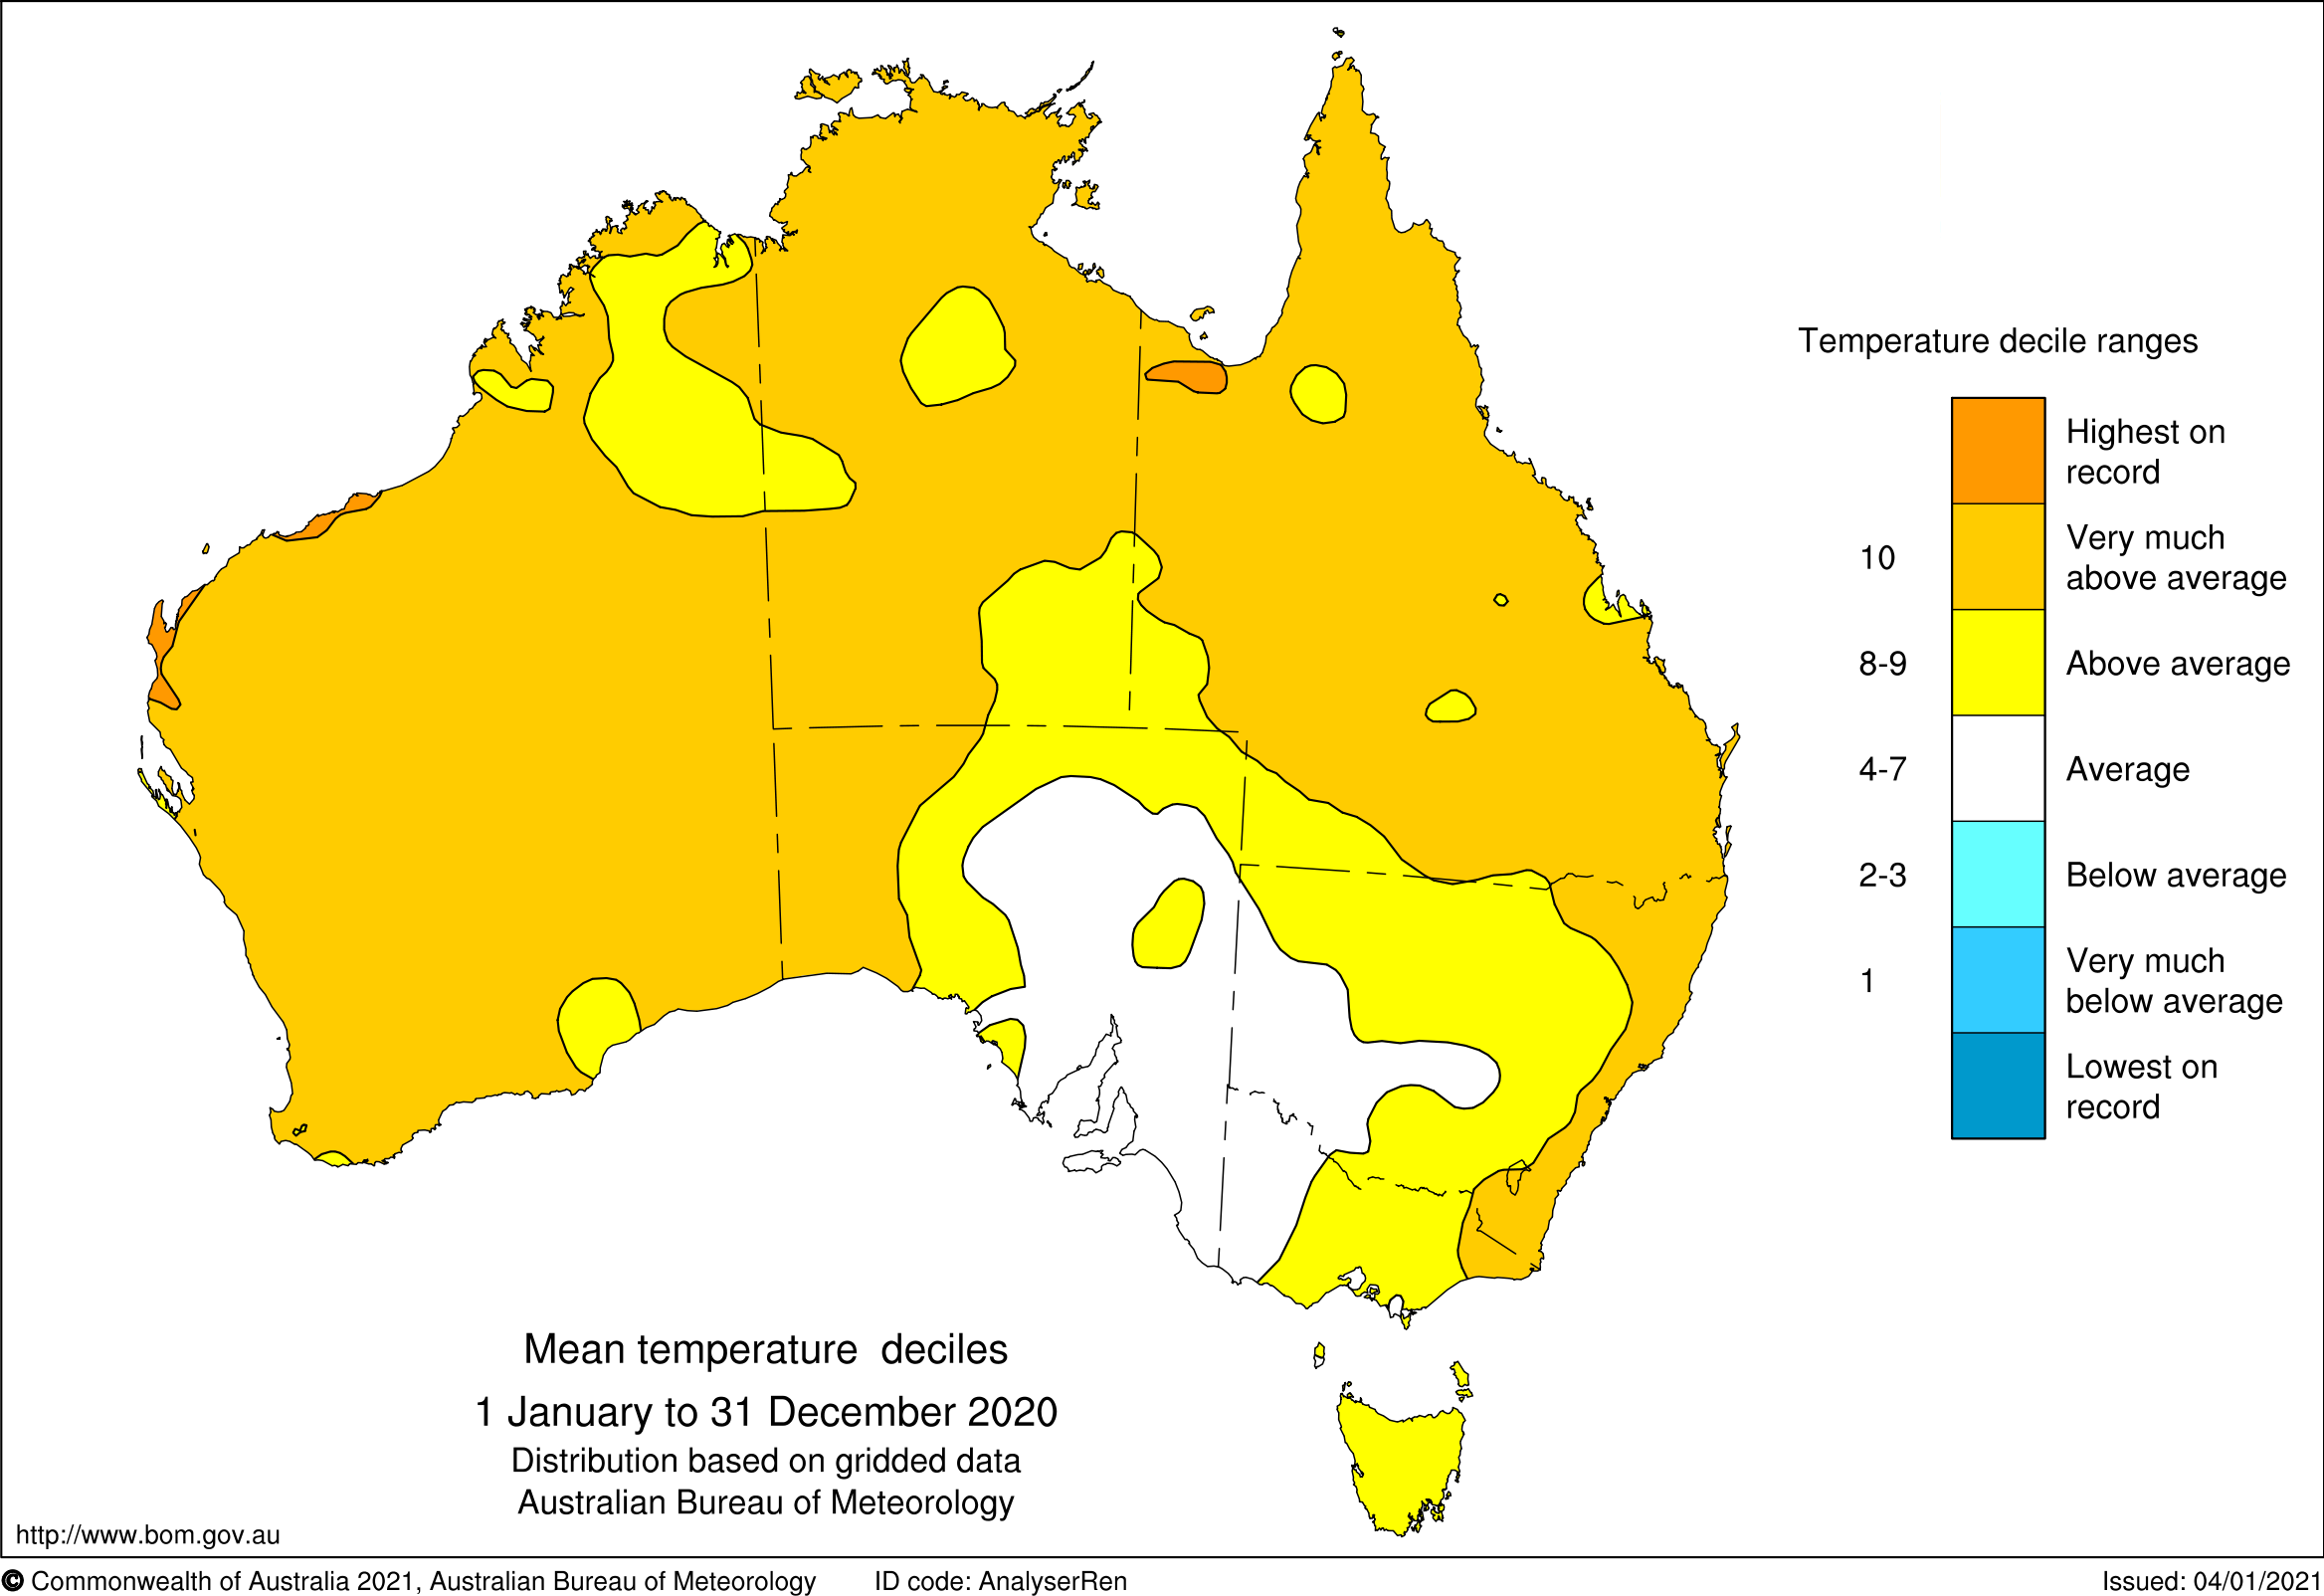 Map of Australia showing mean temperature deciles as warmer than average for most of Australia, as described in the text.